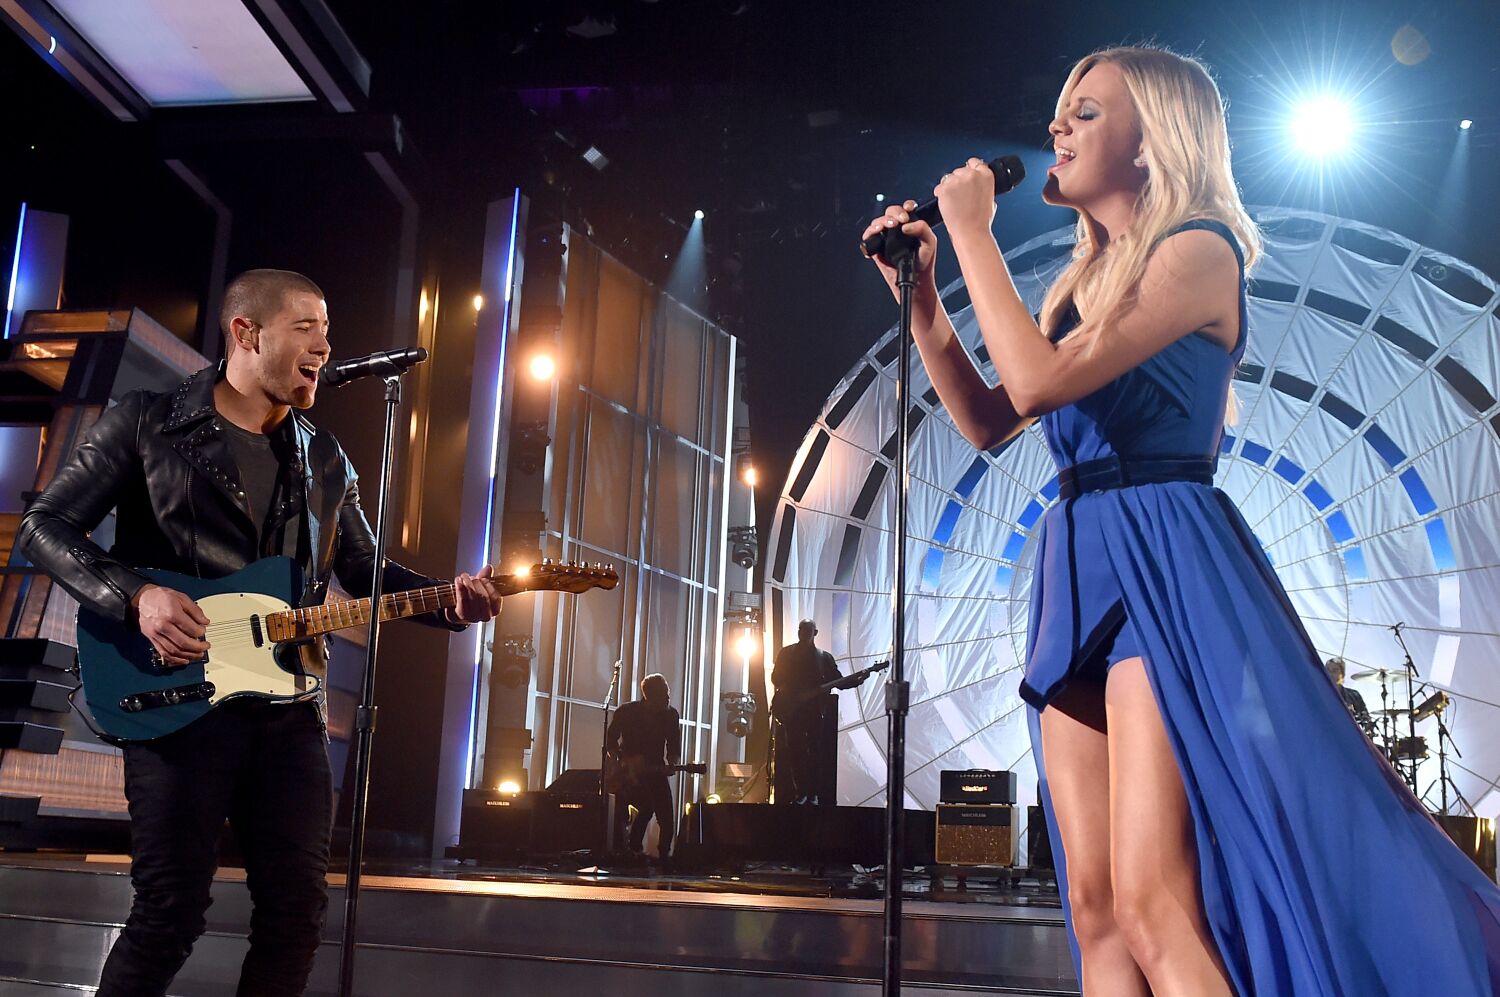 Nick Jonas says 'tragic' guitar solo with Kelsea Ballerini landed him in therapy